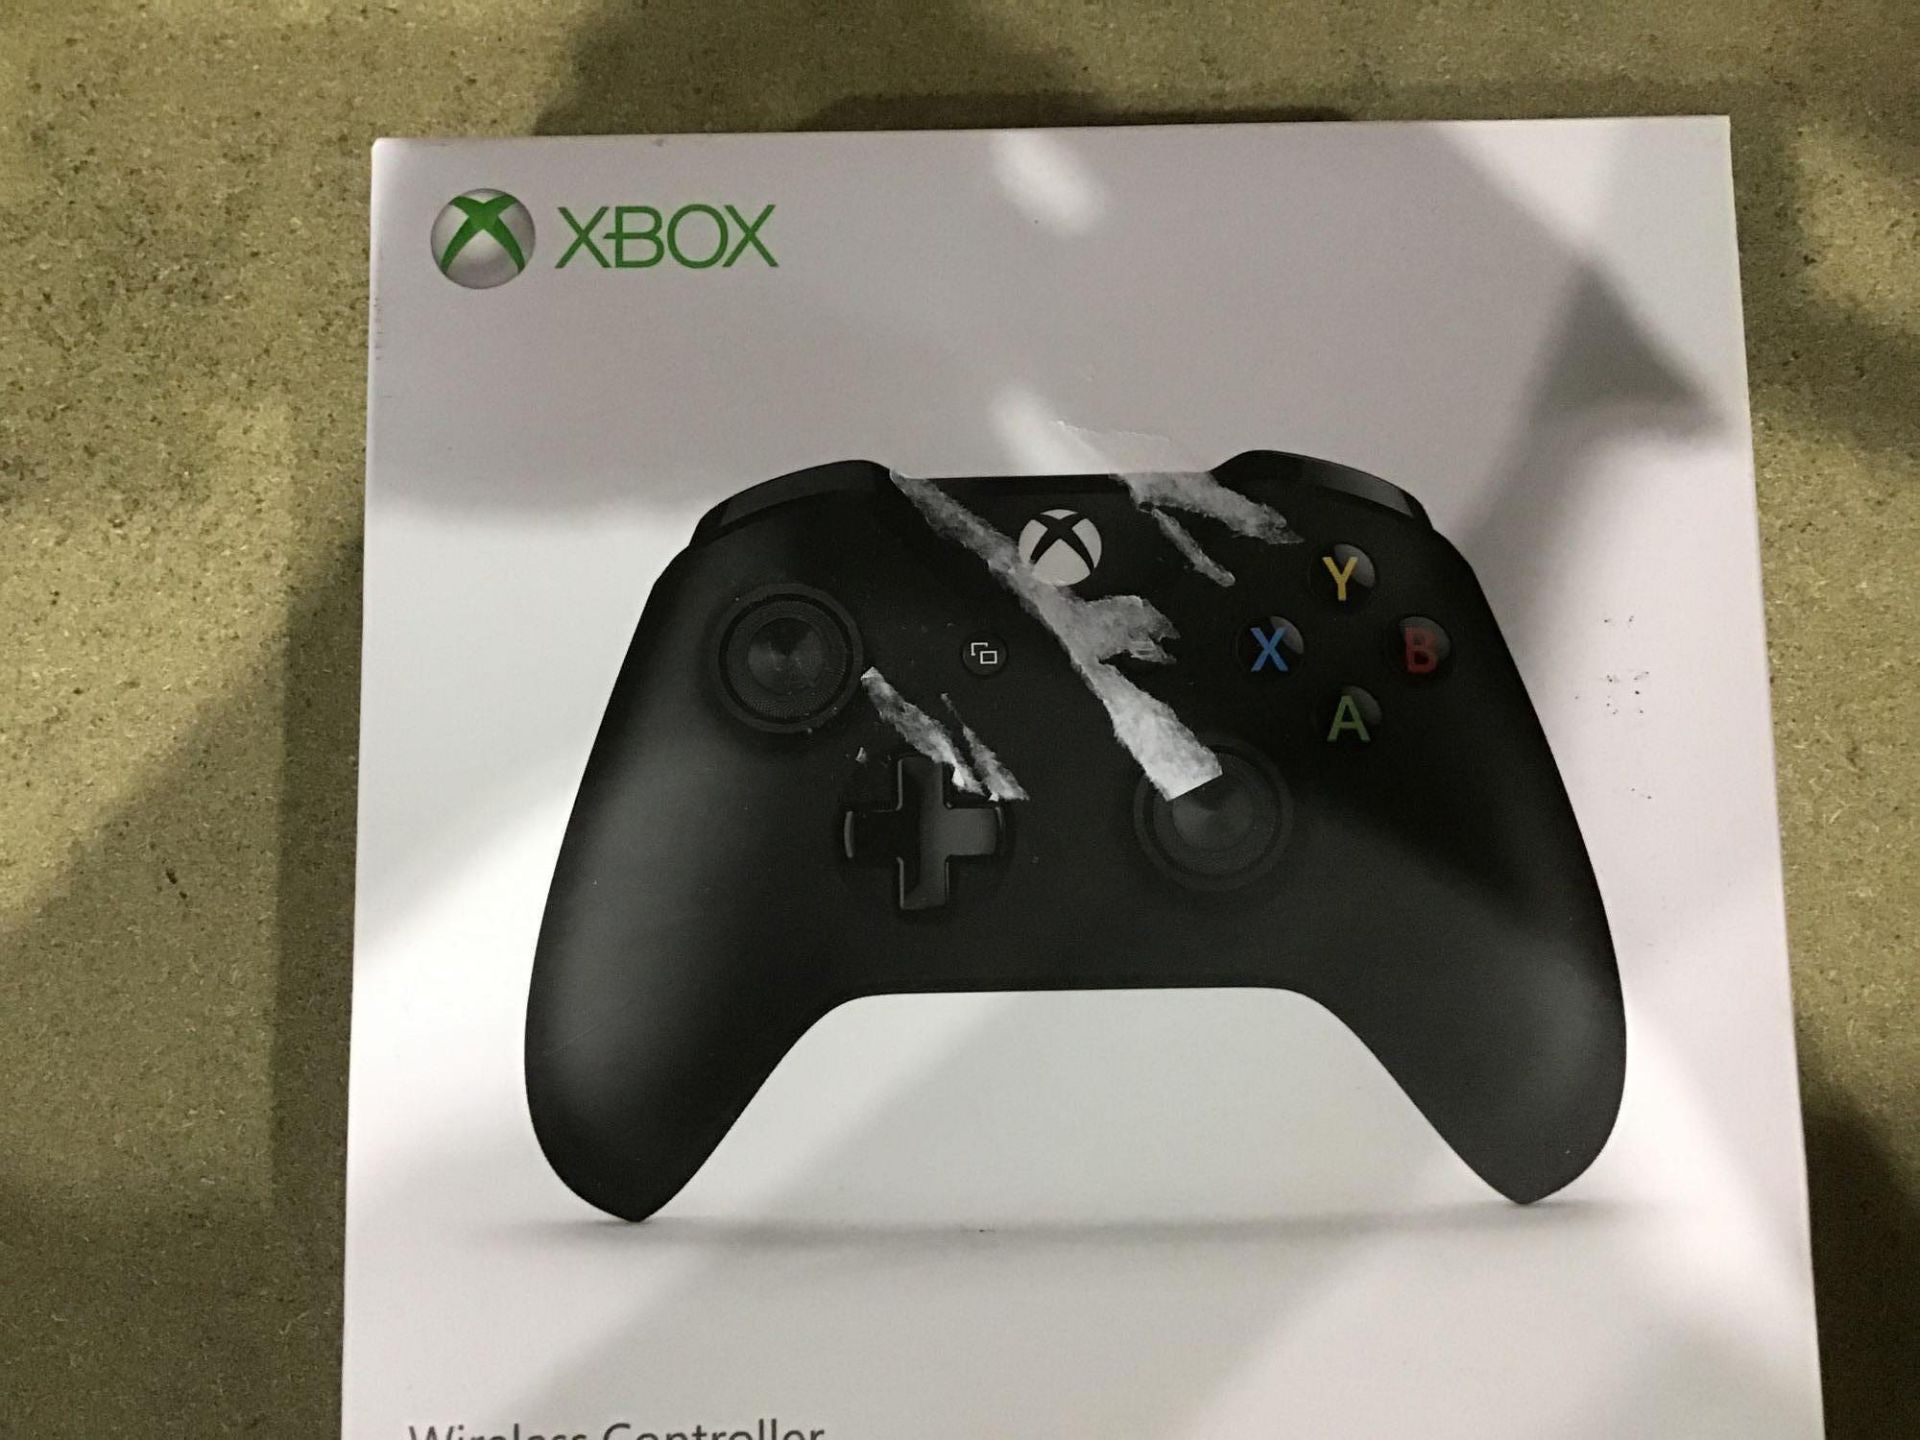 Official Xbox One Wireless Controller - Black 619/9582 £49.99 RRP - Image 3 of 4